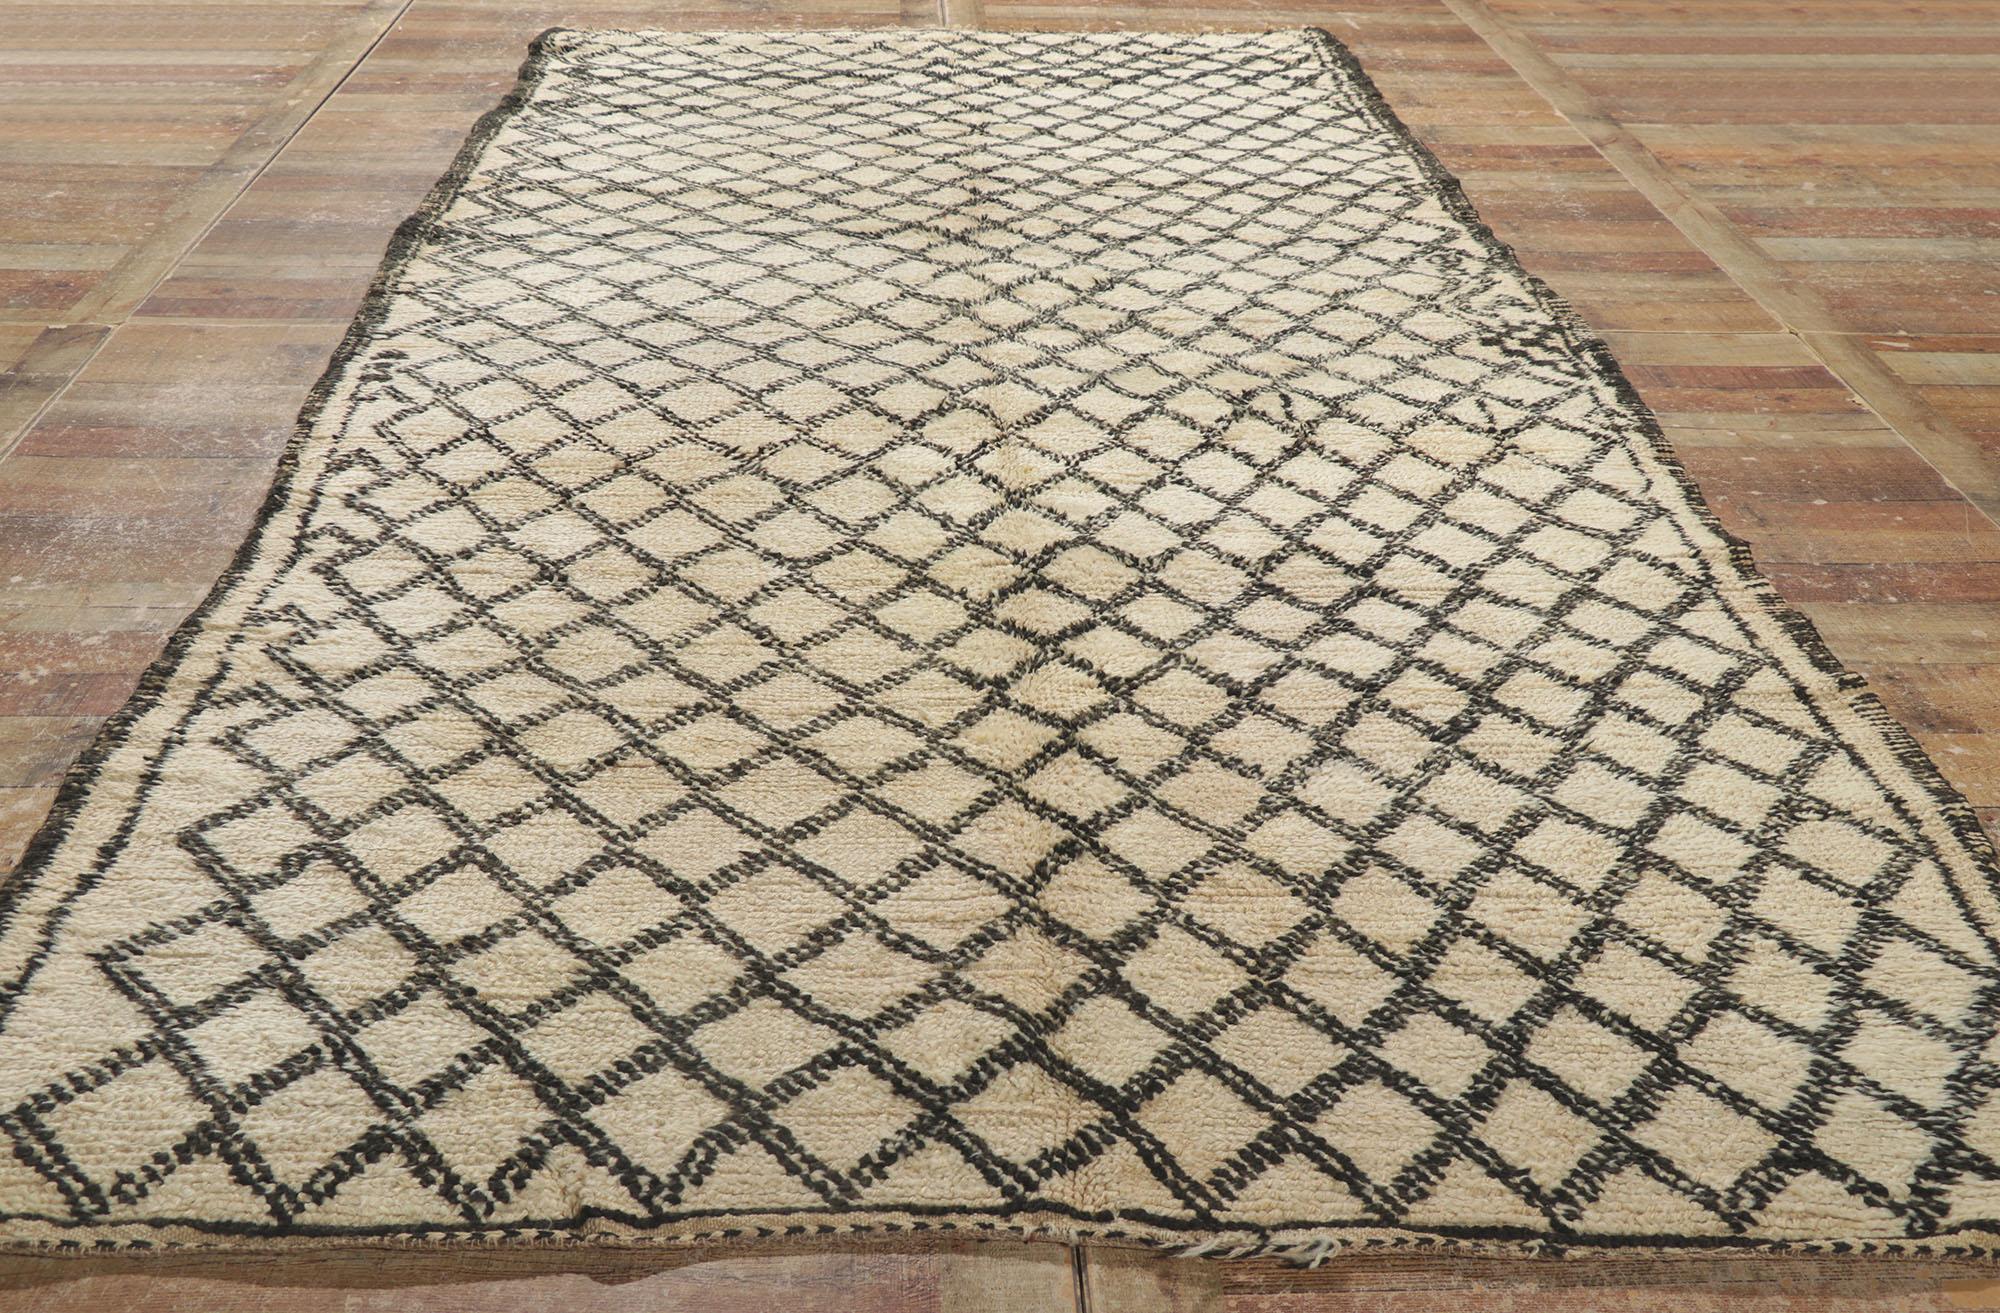 Vintage Beni Ourain Moroccan Rug, Midcentury Modern Meets Tribal Enchantment For Sale 2